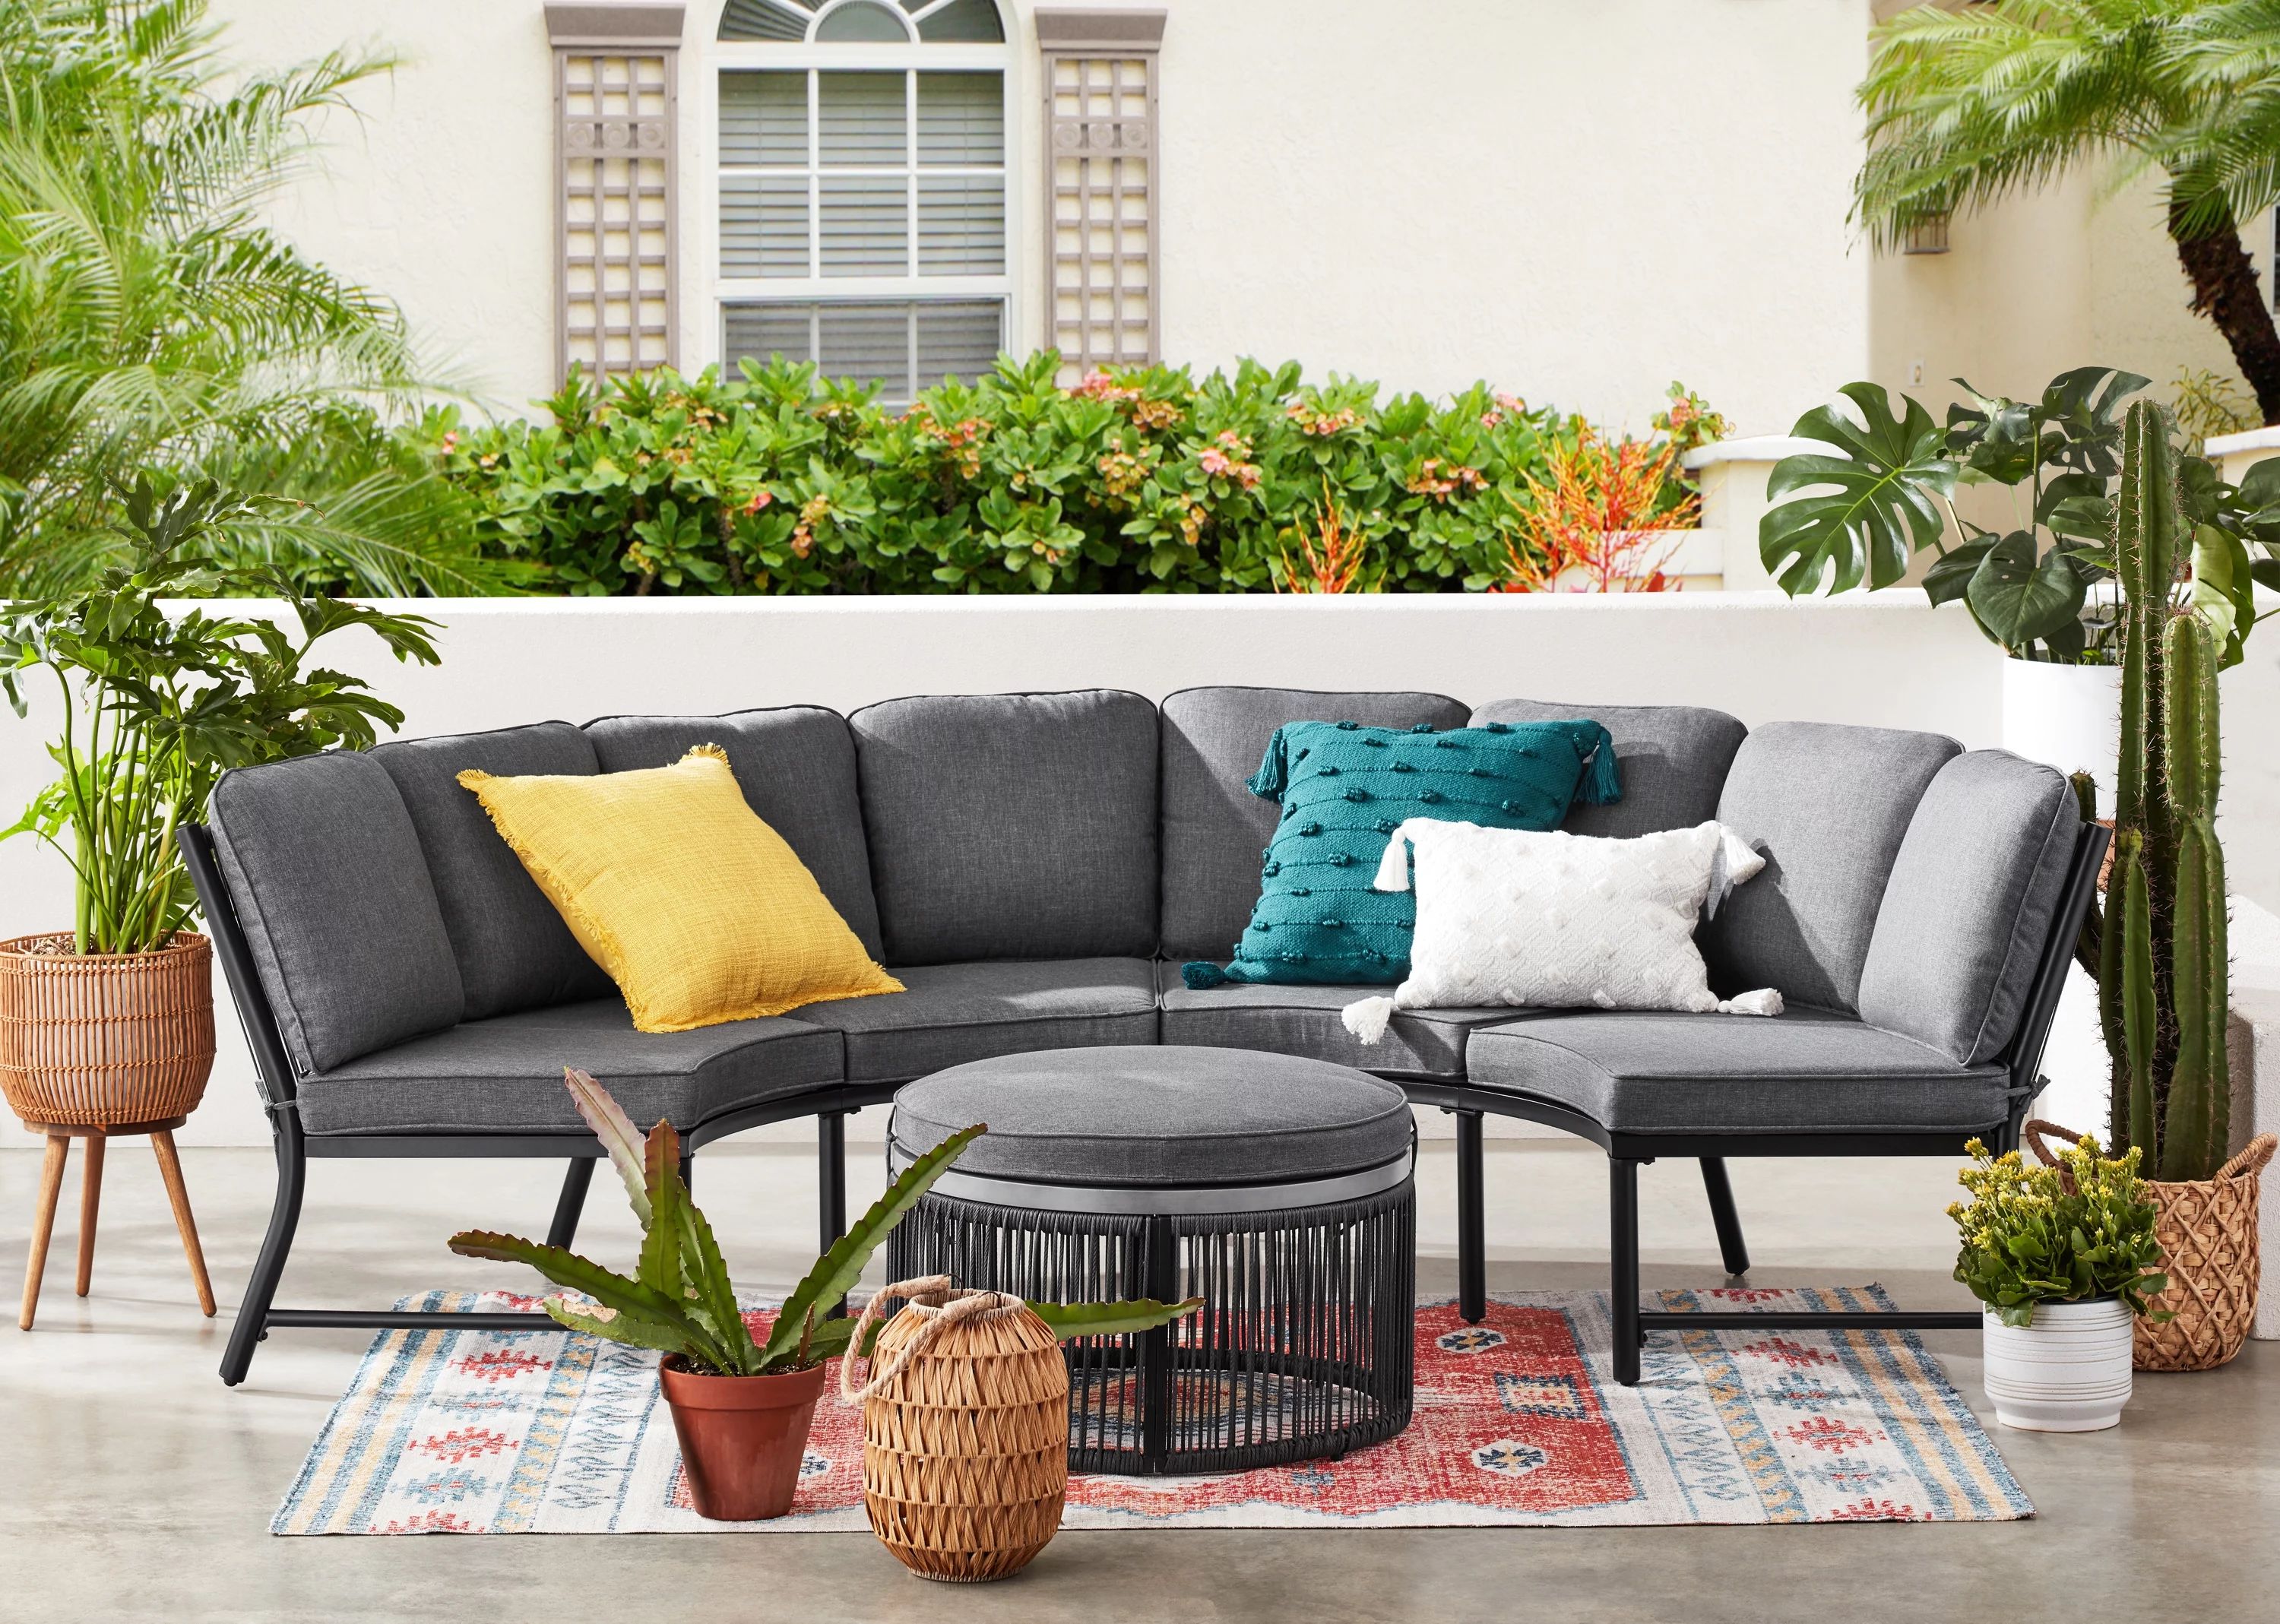 Mainstays Lawson Ridge 3-Piece Steel Curved Outdoor Sectional Set with Cushions, Gray - Seats 4 | Walmart (US)